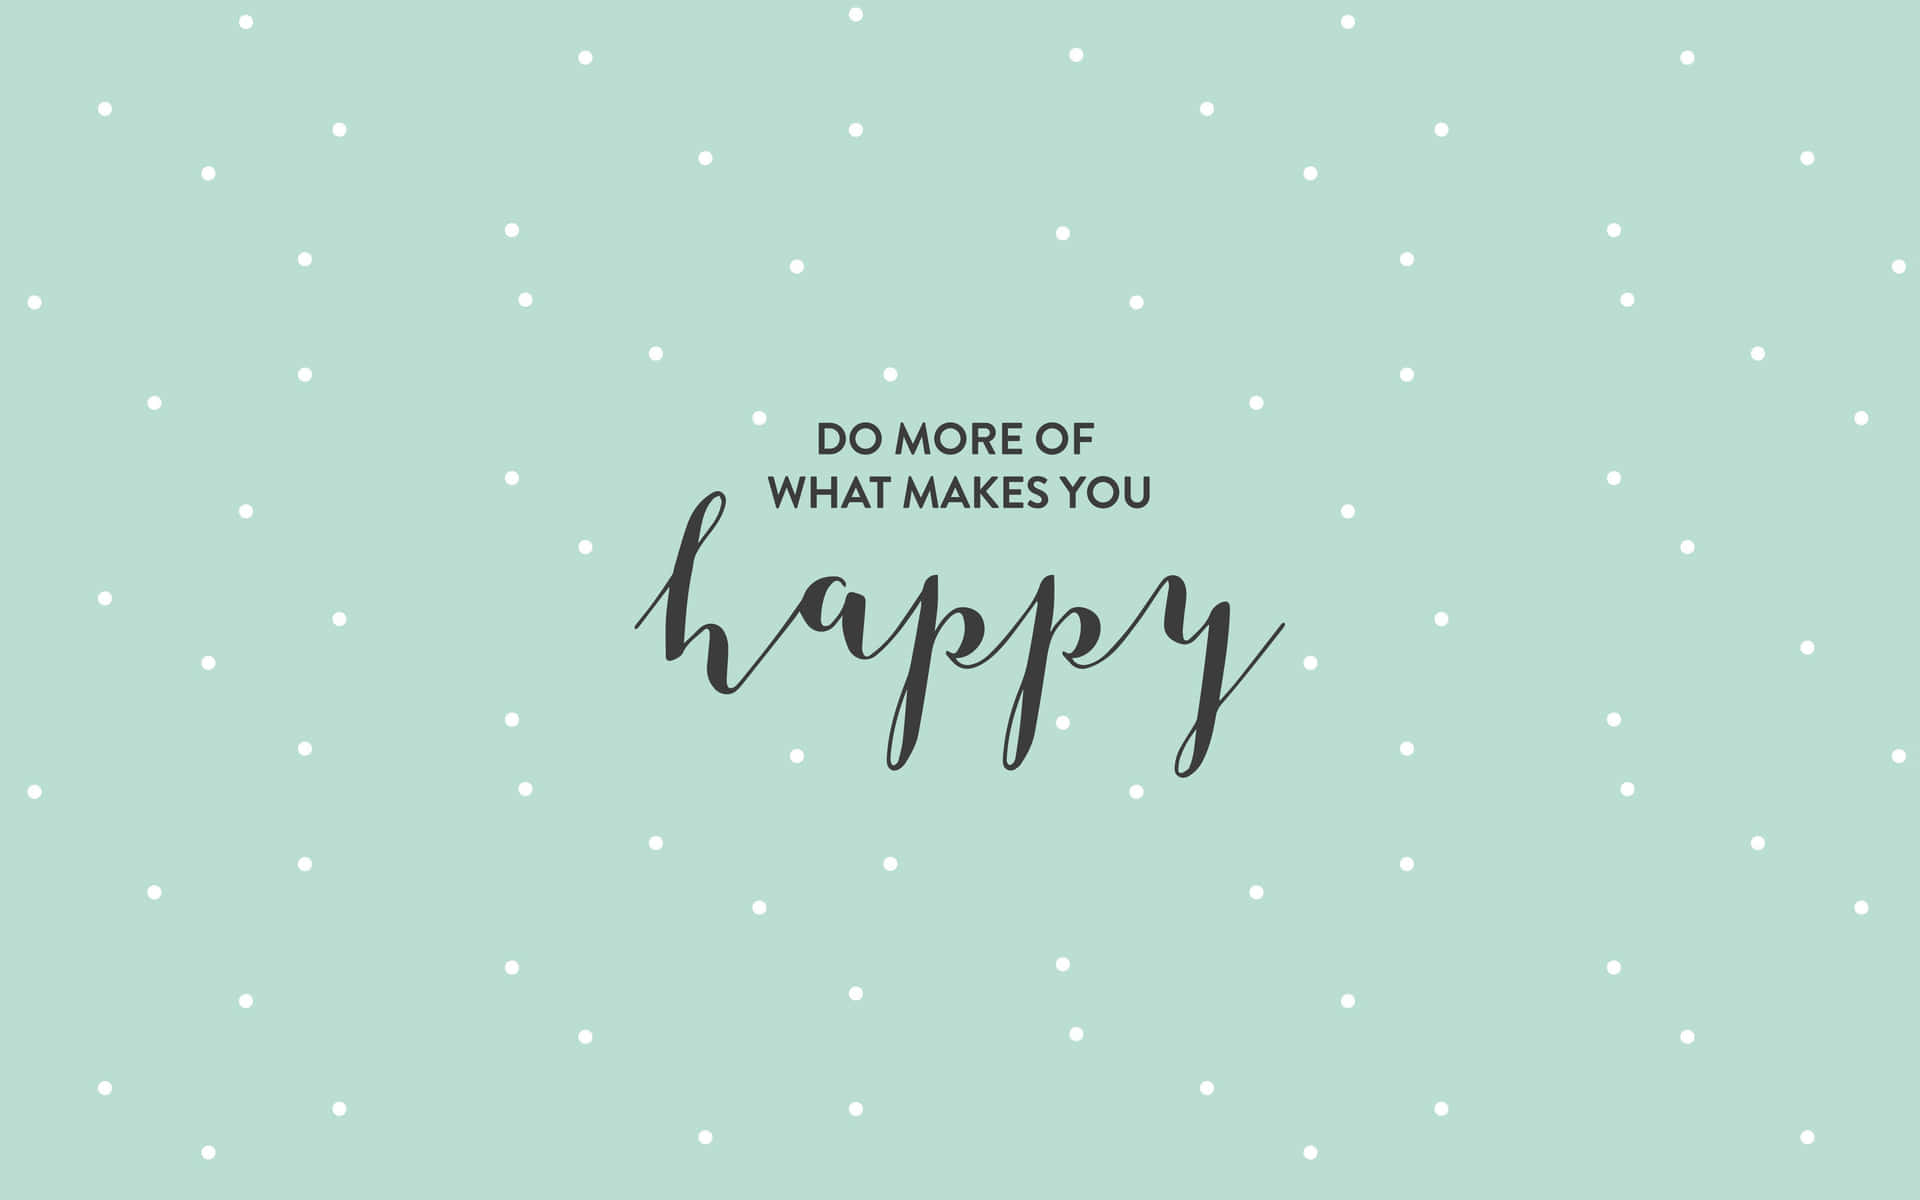 Happiness Quotes Wallpaper